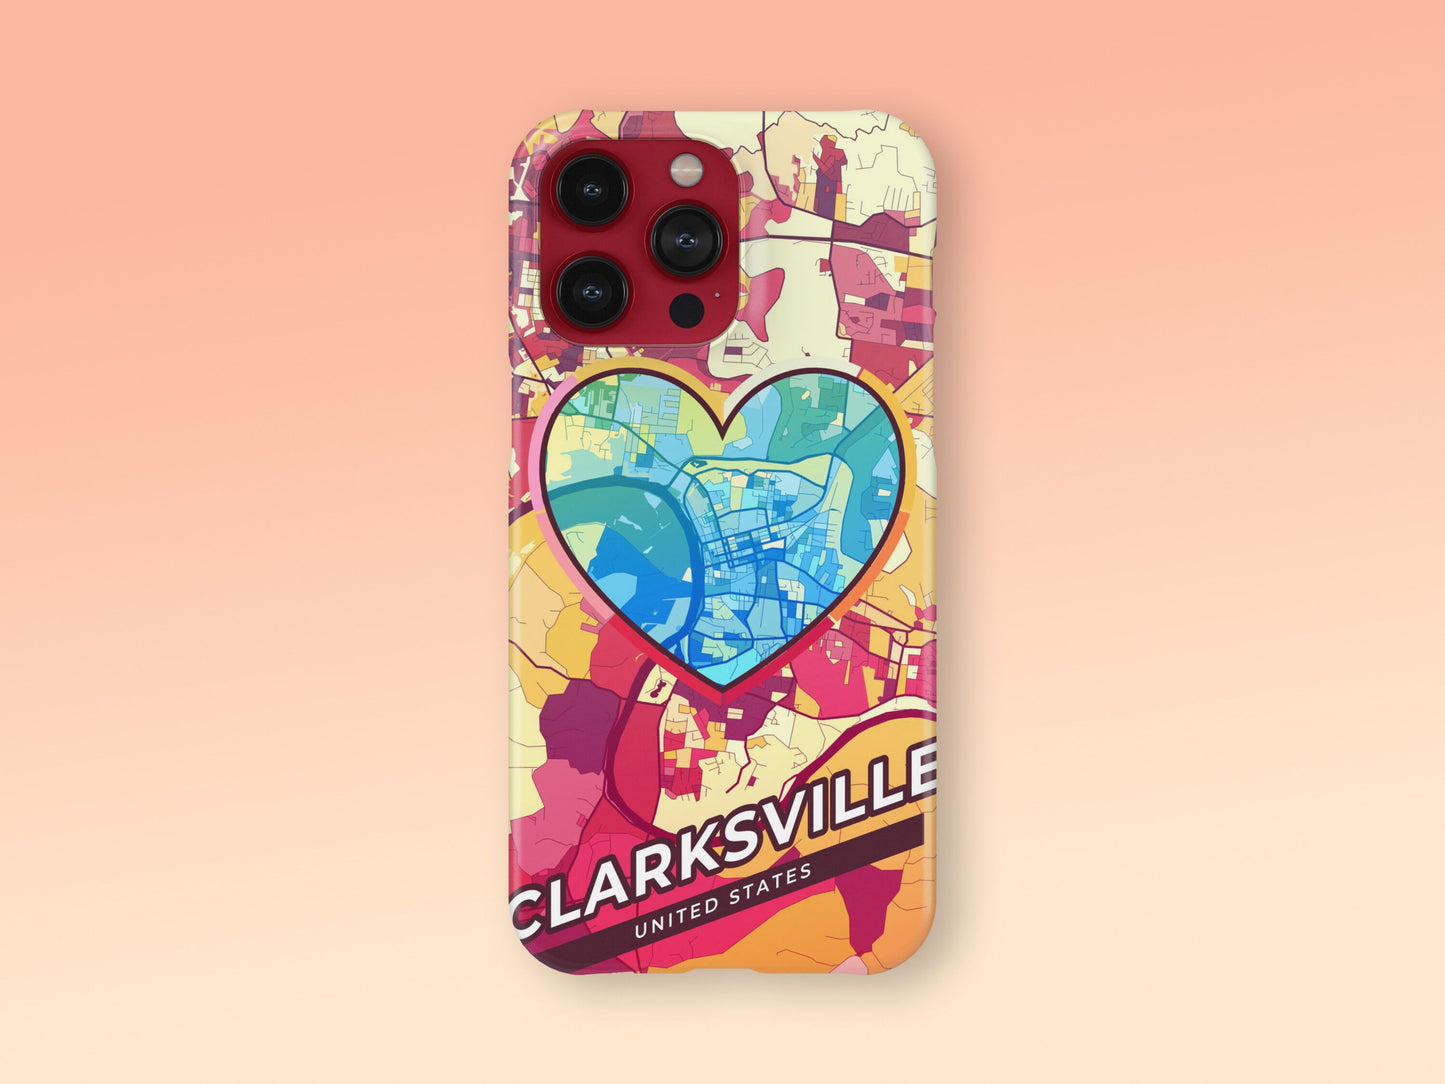 Clarksville Tennessee slim phone case with colorful icon. Birthday, wedding or housewarming gift. Couple match cases. 2